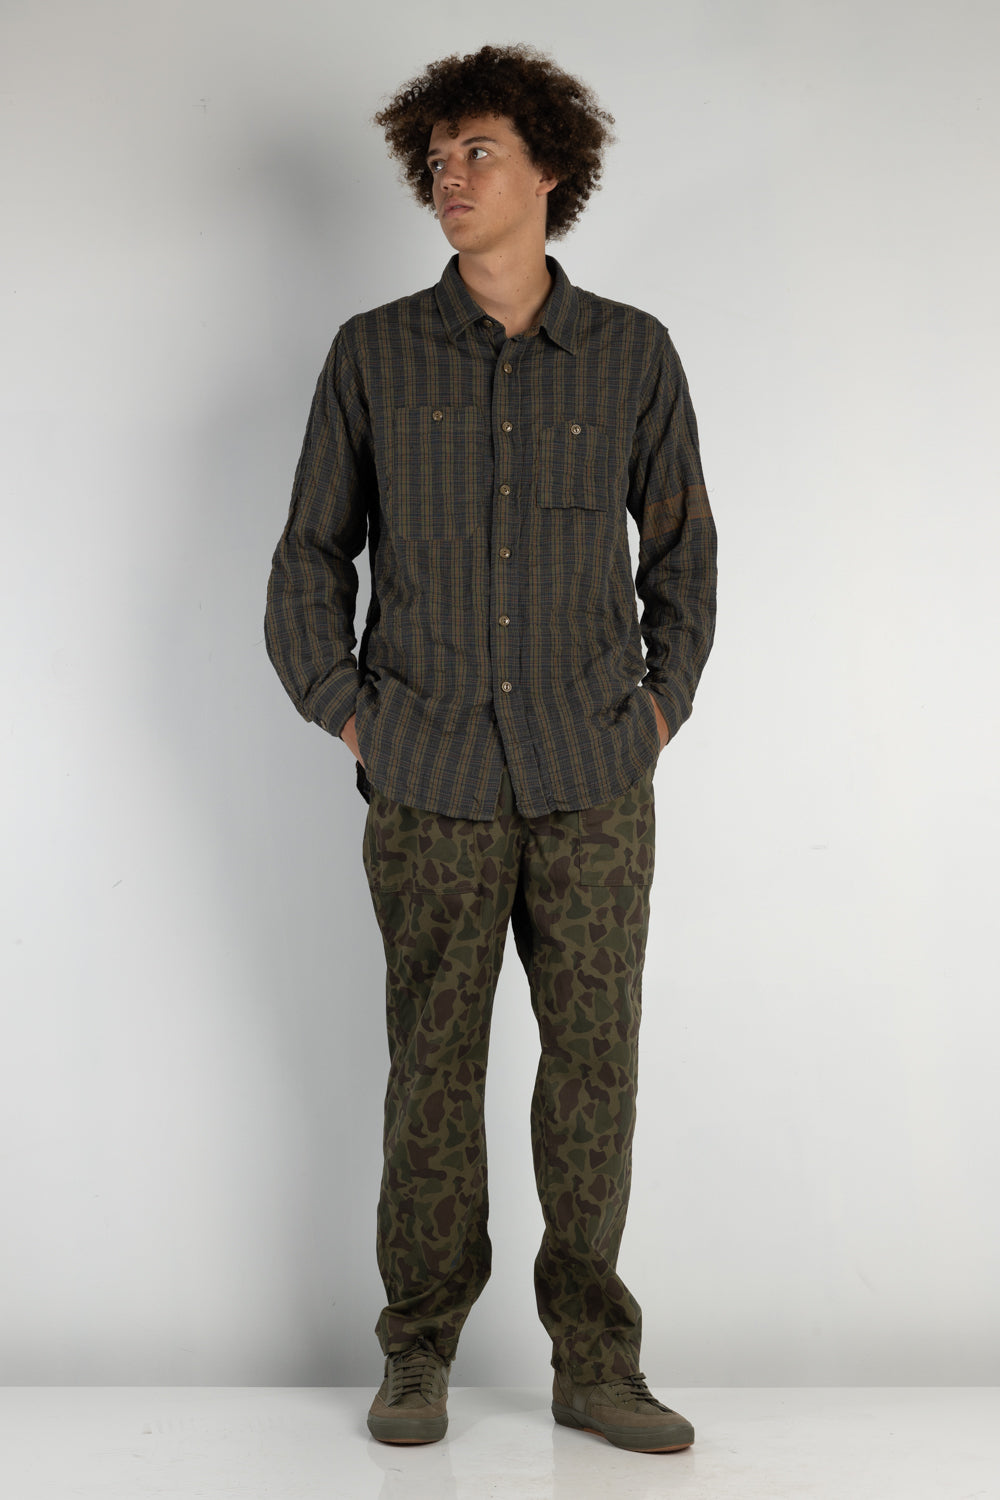 Engineered Garments Fatigue Pant 6.5oz Flat Twill olive The Standard  Store